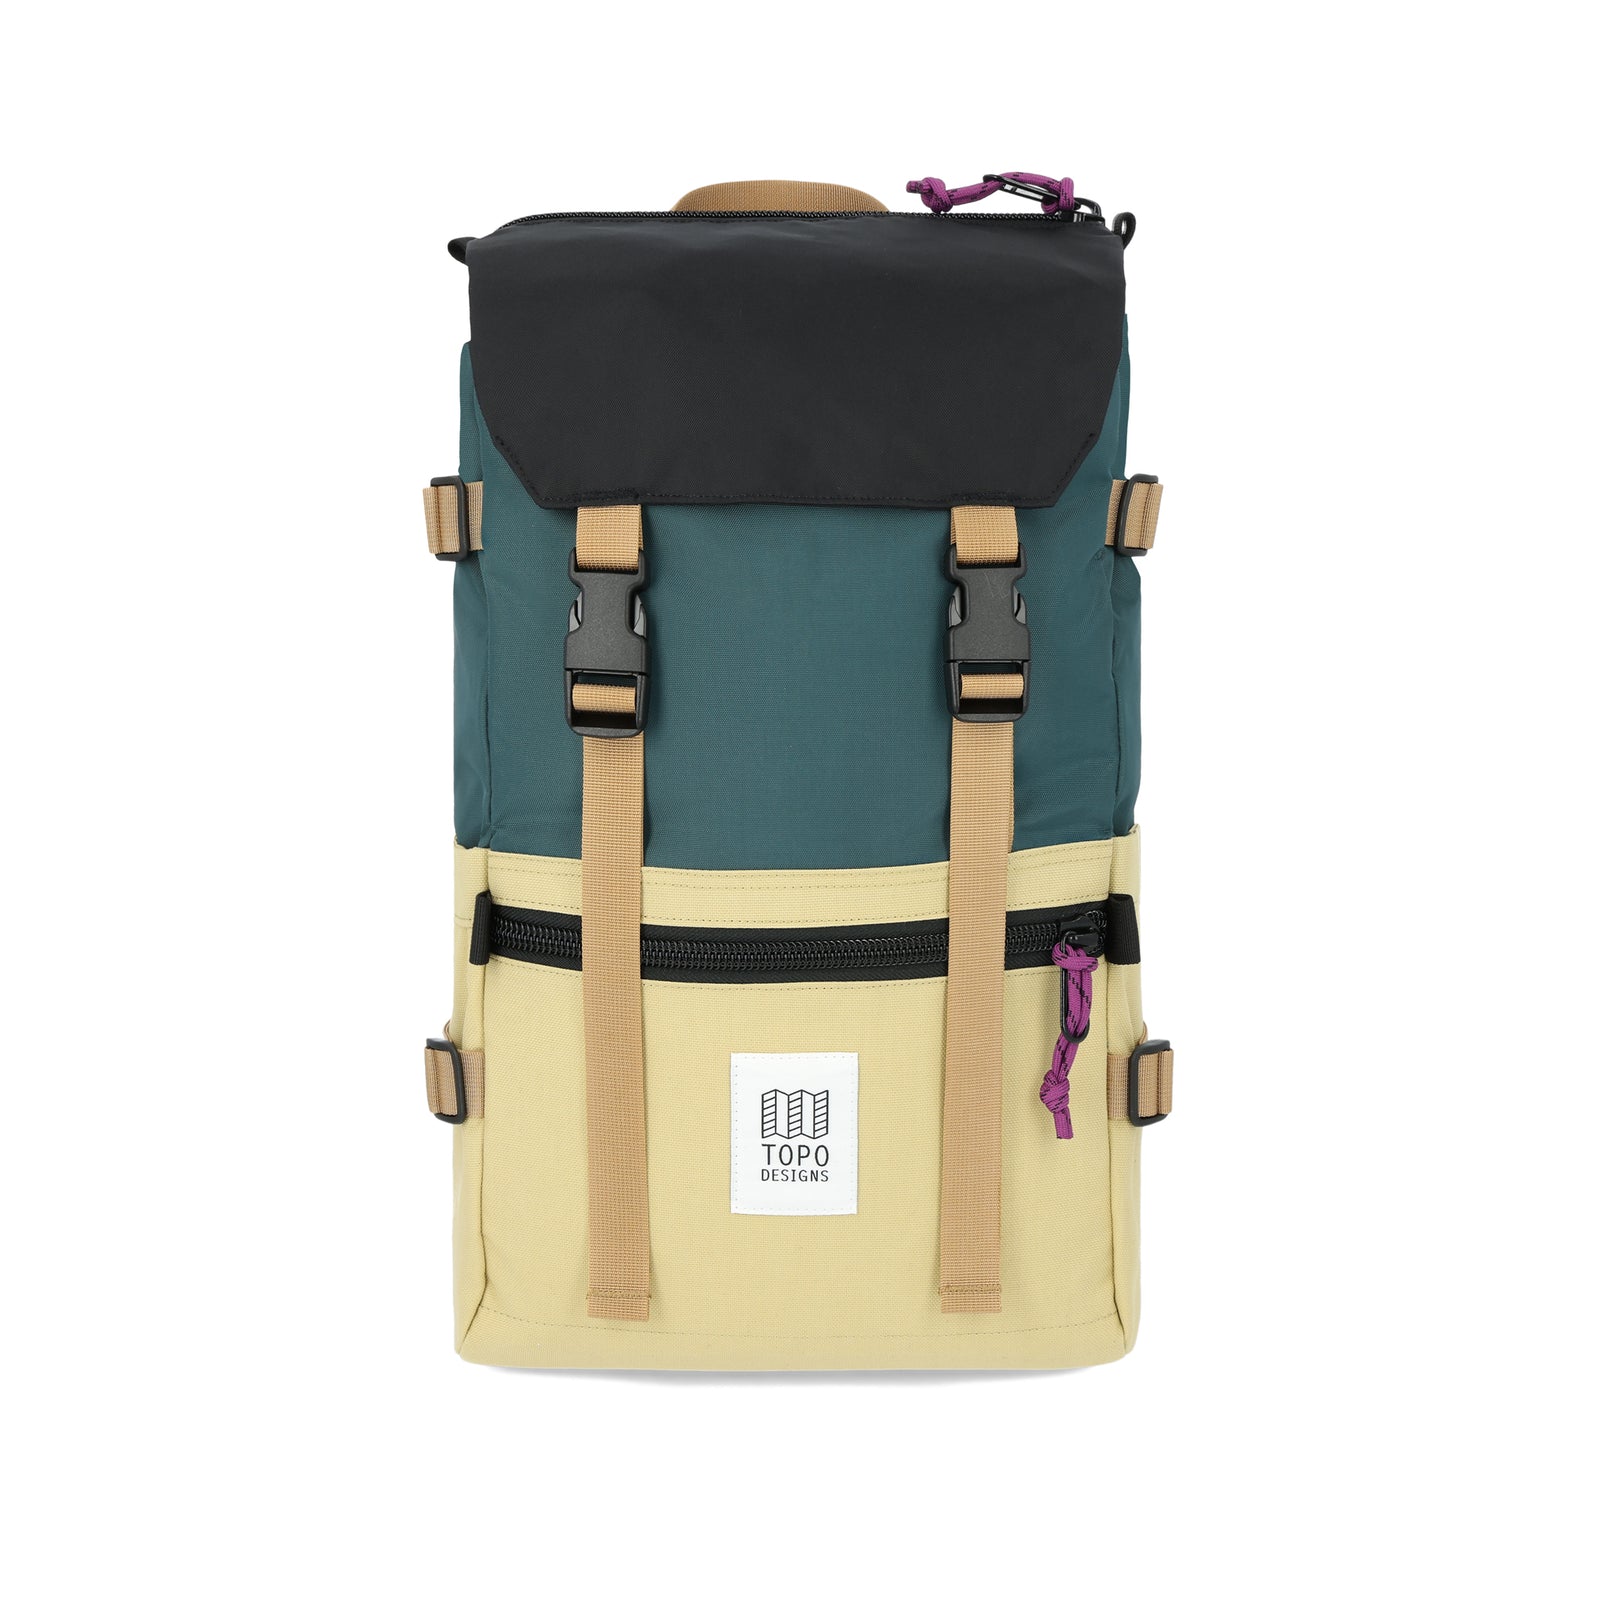 Topo Designs Rover Pack Classic laptop backpack in "Hemp / Botanic Green".